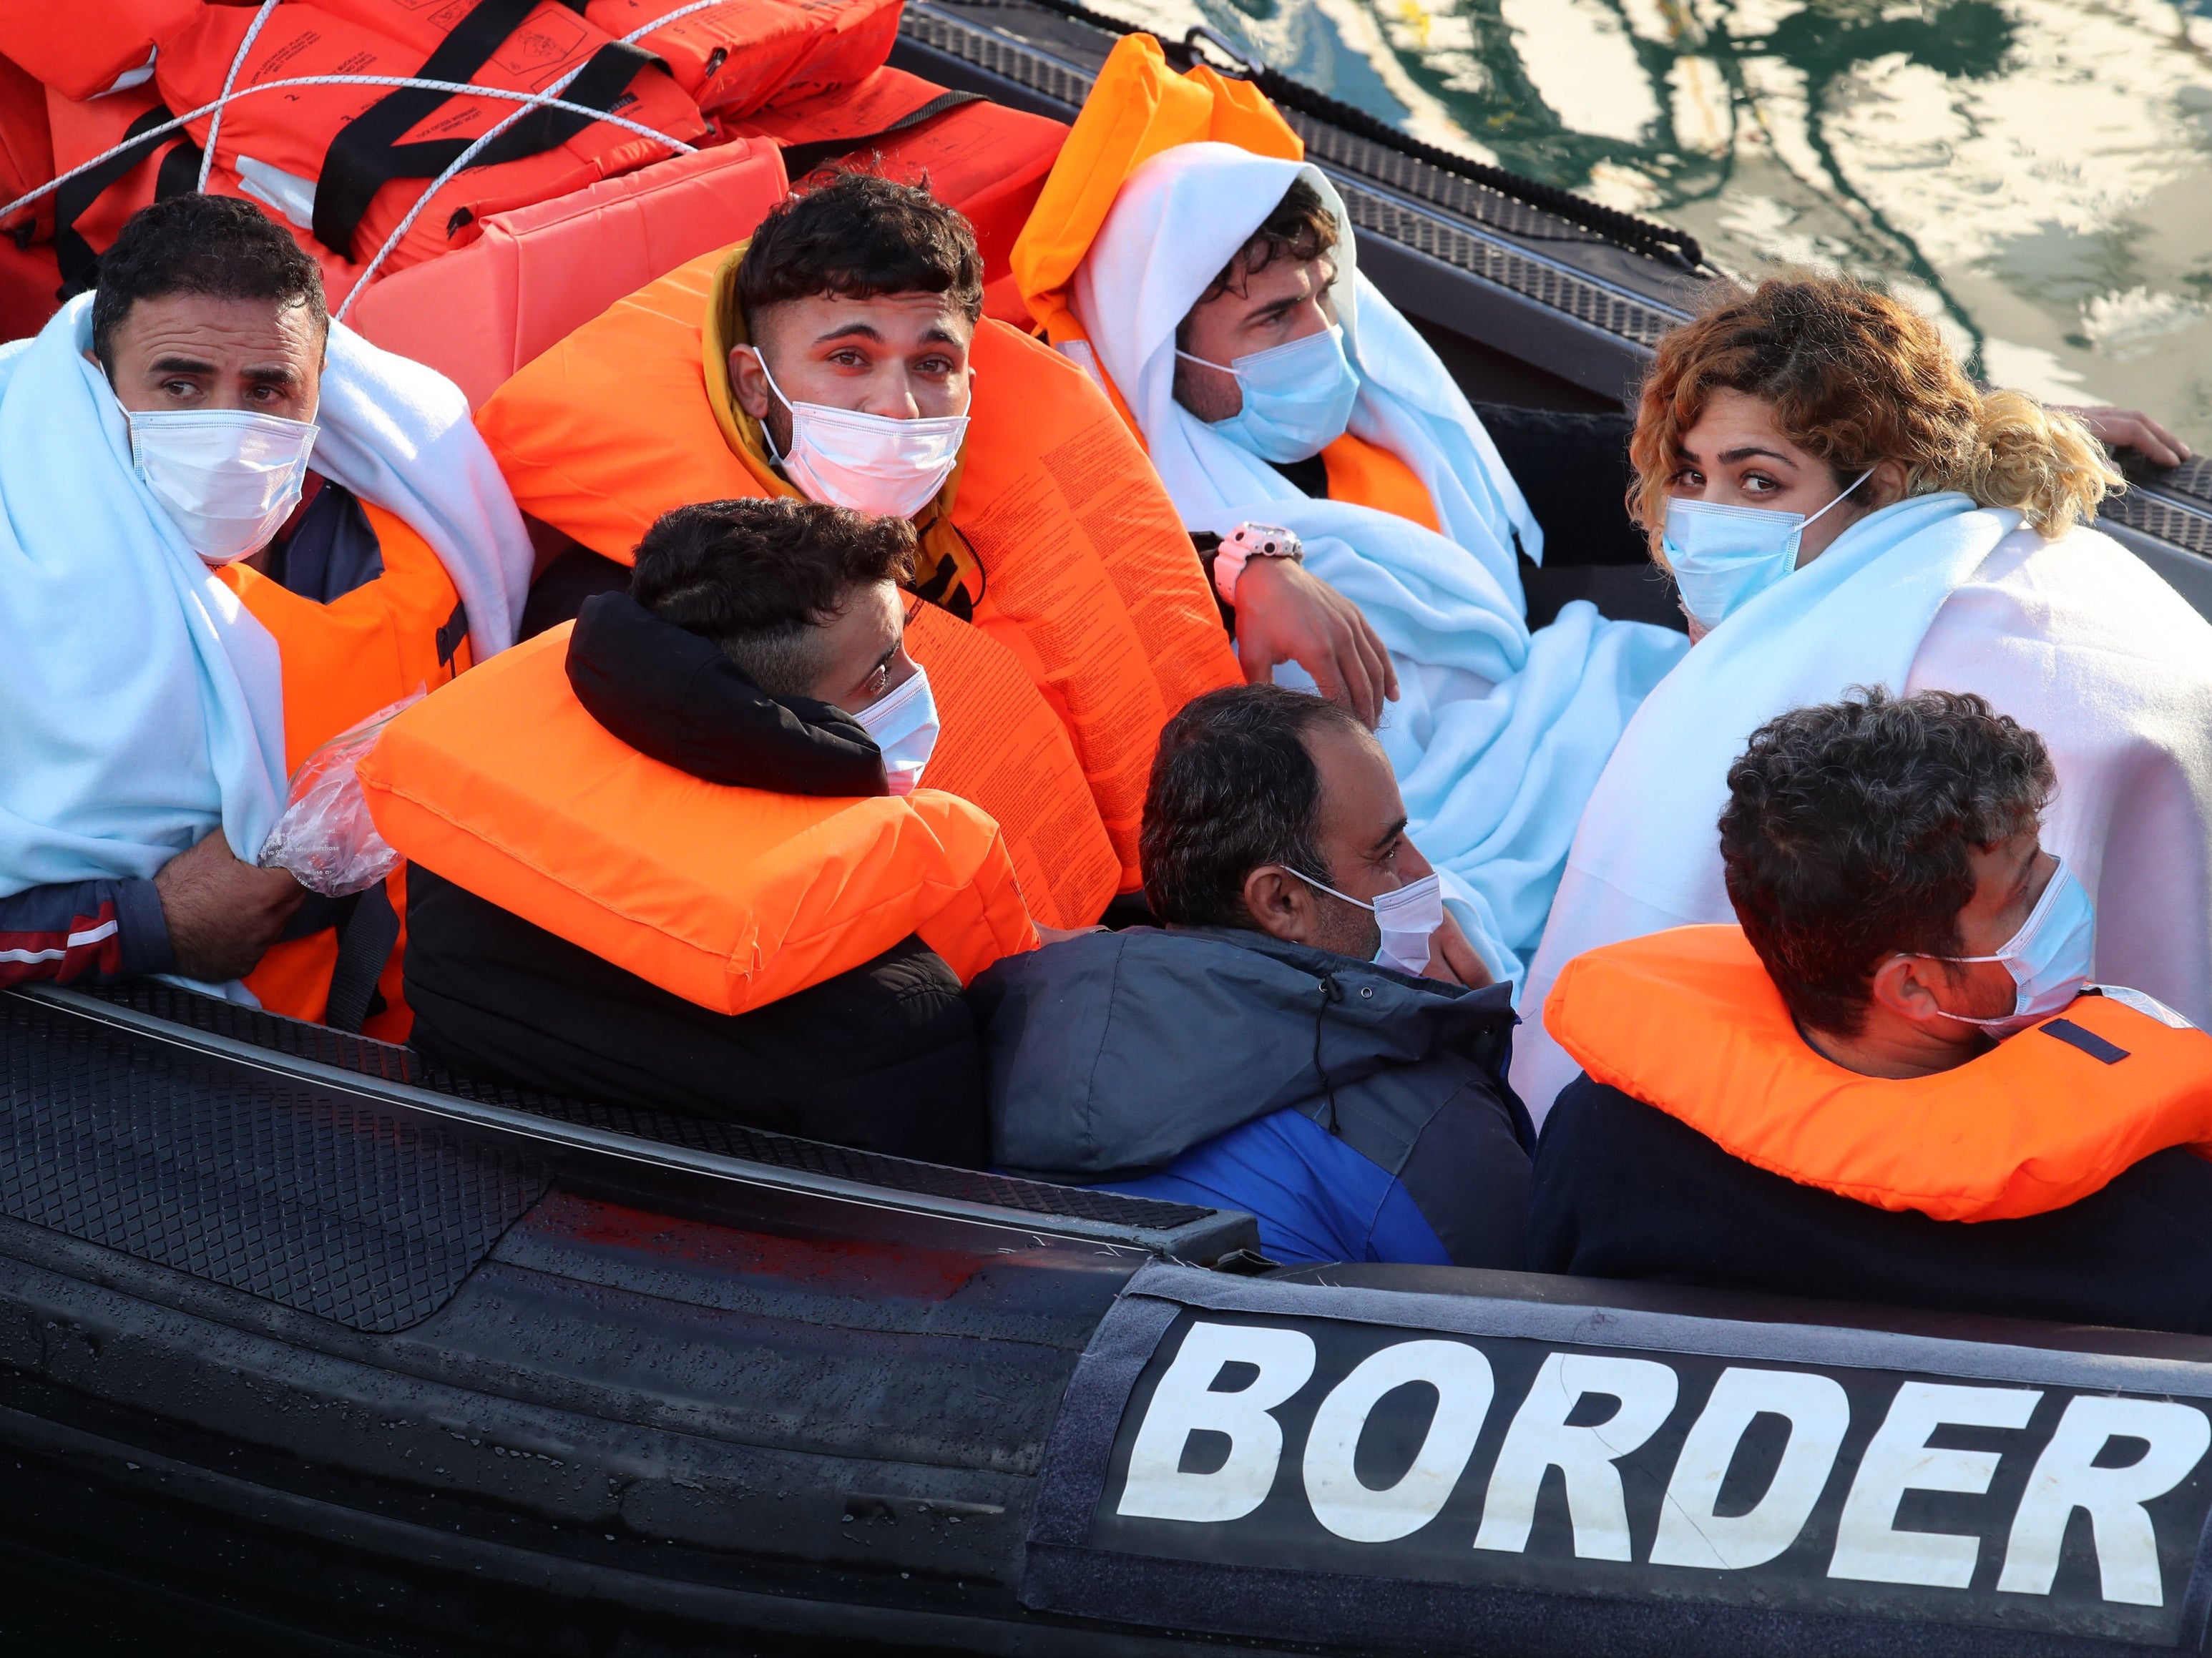 A group of migrants are brought in to Dover, Kent, onboard a Border Force vessel following a small boat incident in the Channel on 7 November 2020